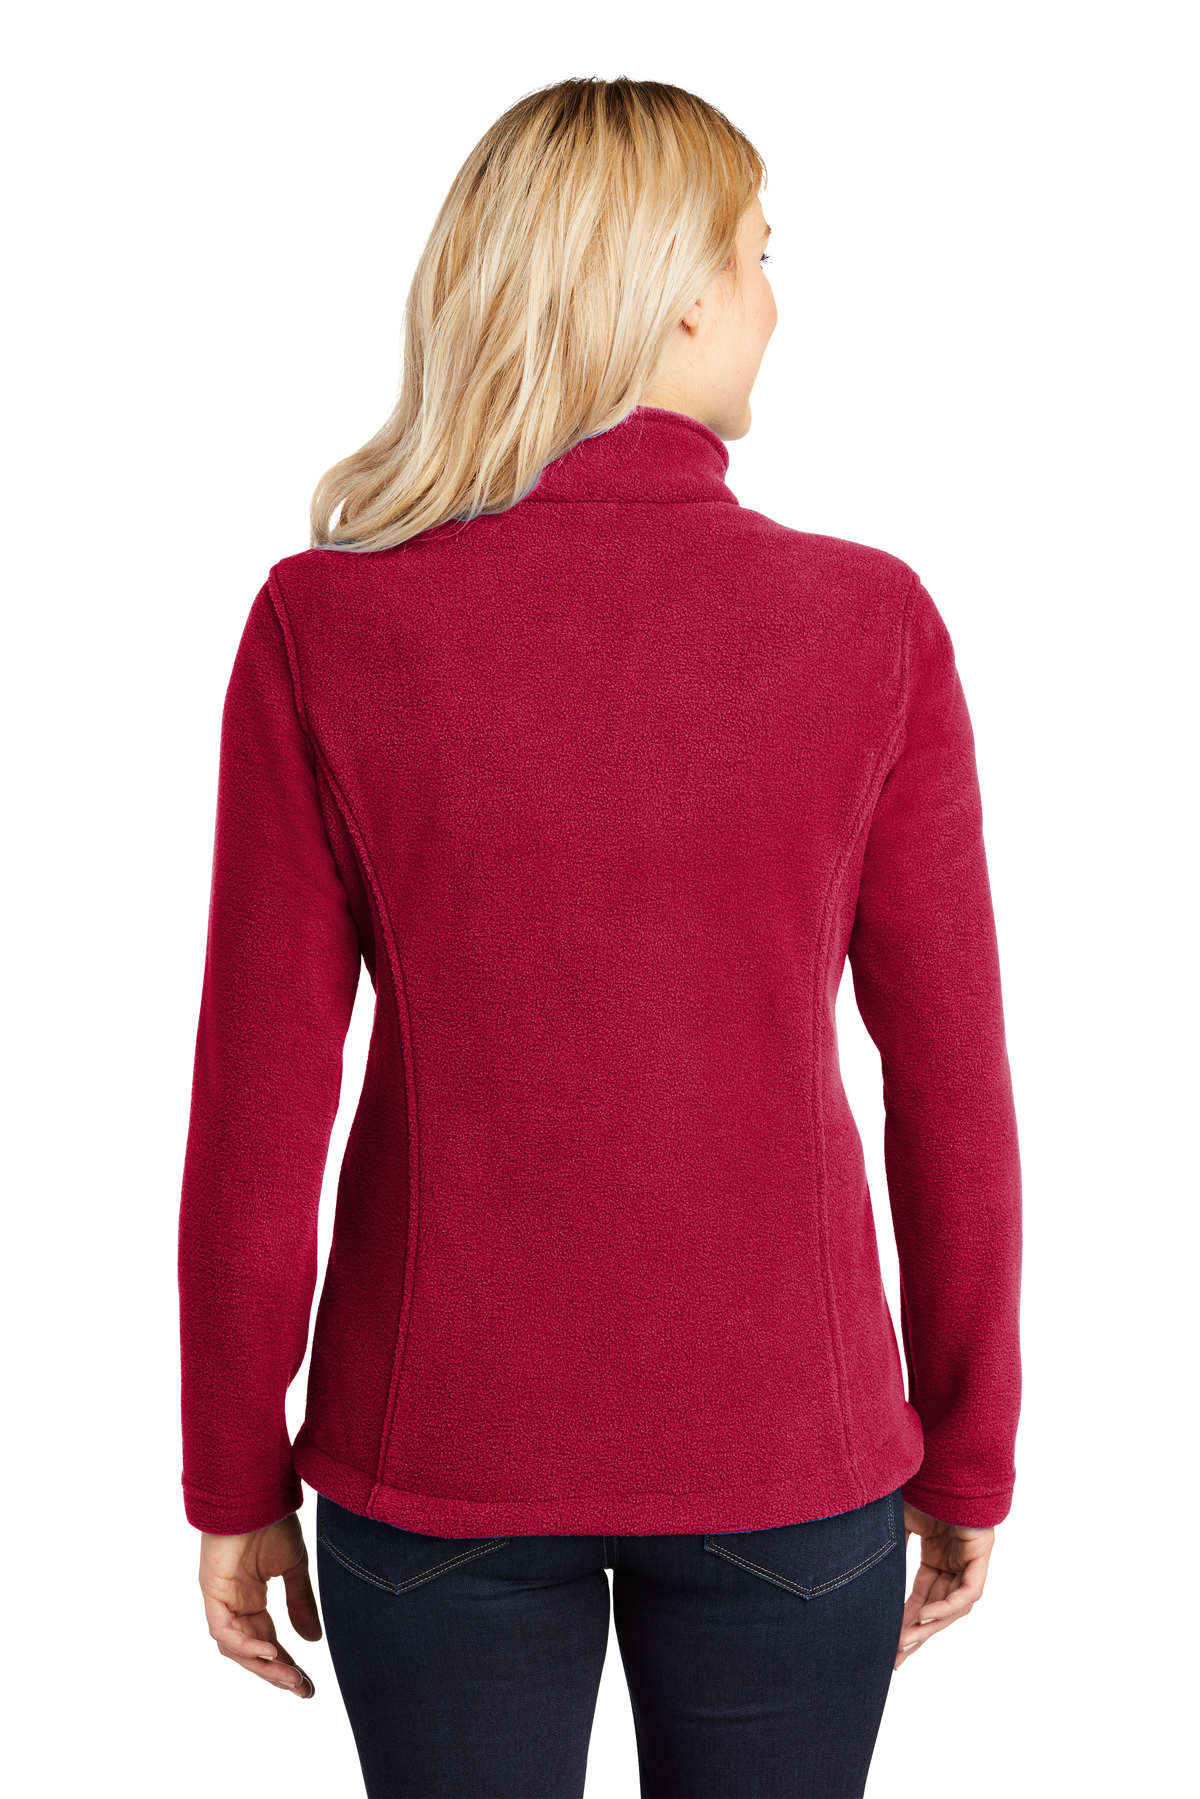 Port Authority® Ladies Colorblock Value Fleece Jacket - Embroidery -  Progress Promotional Products